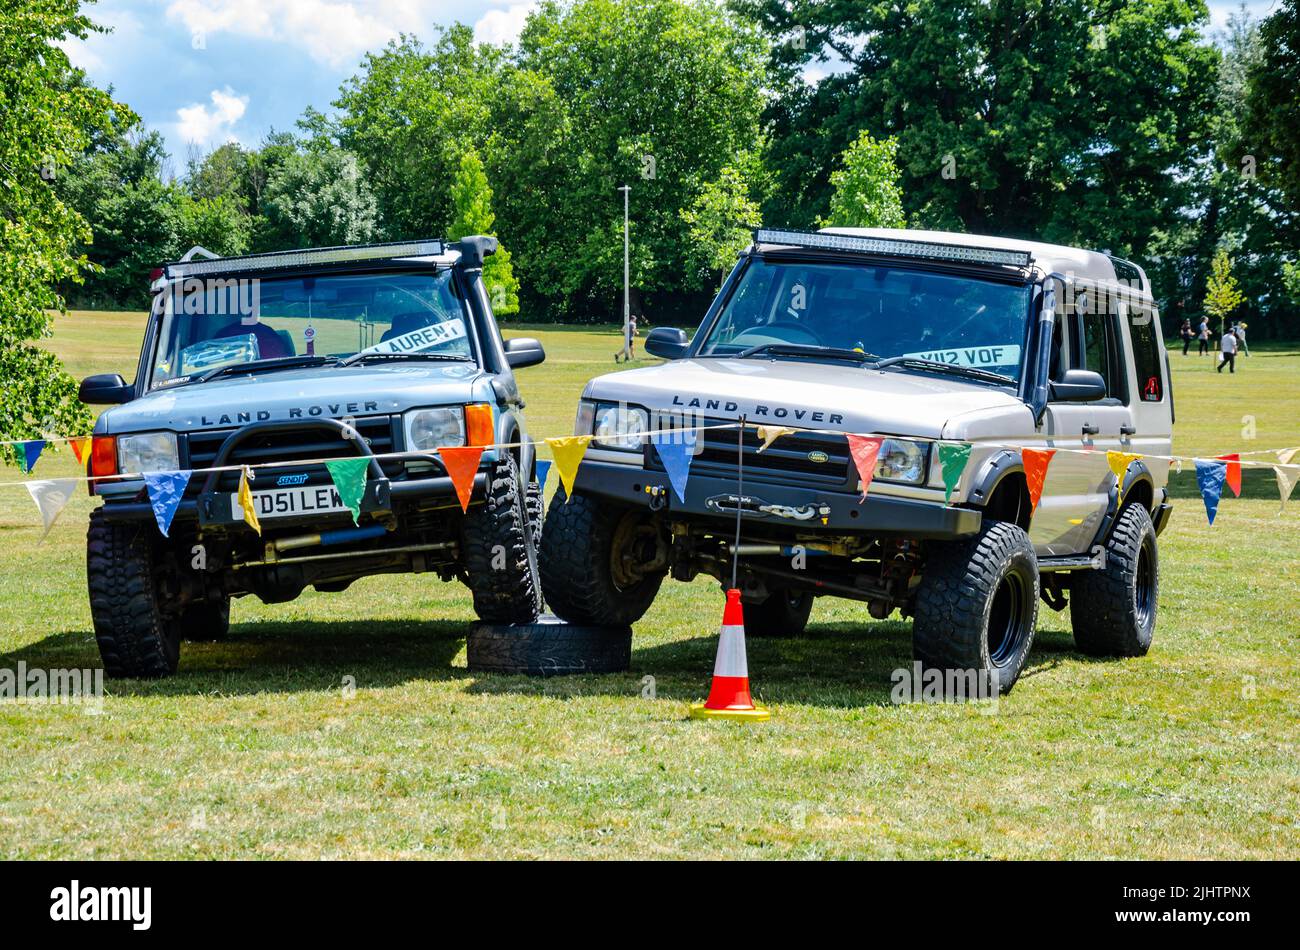 A collection of Land Rover and Range Rover 4x4 all-terrain off-road vehicles at The Berkshire Motor Show in Reading, UK Stock Photo